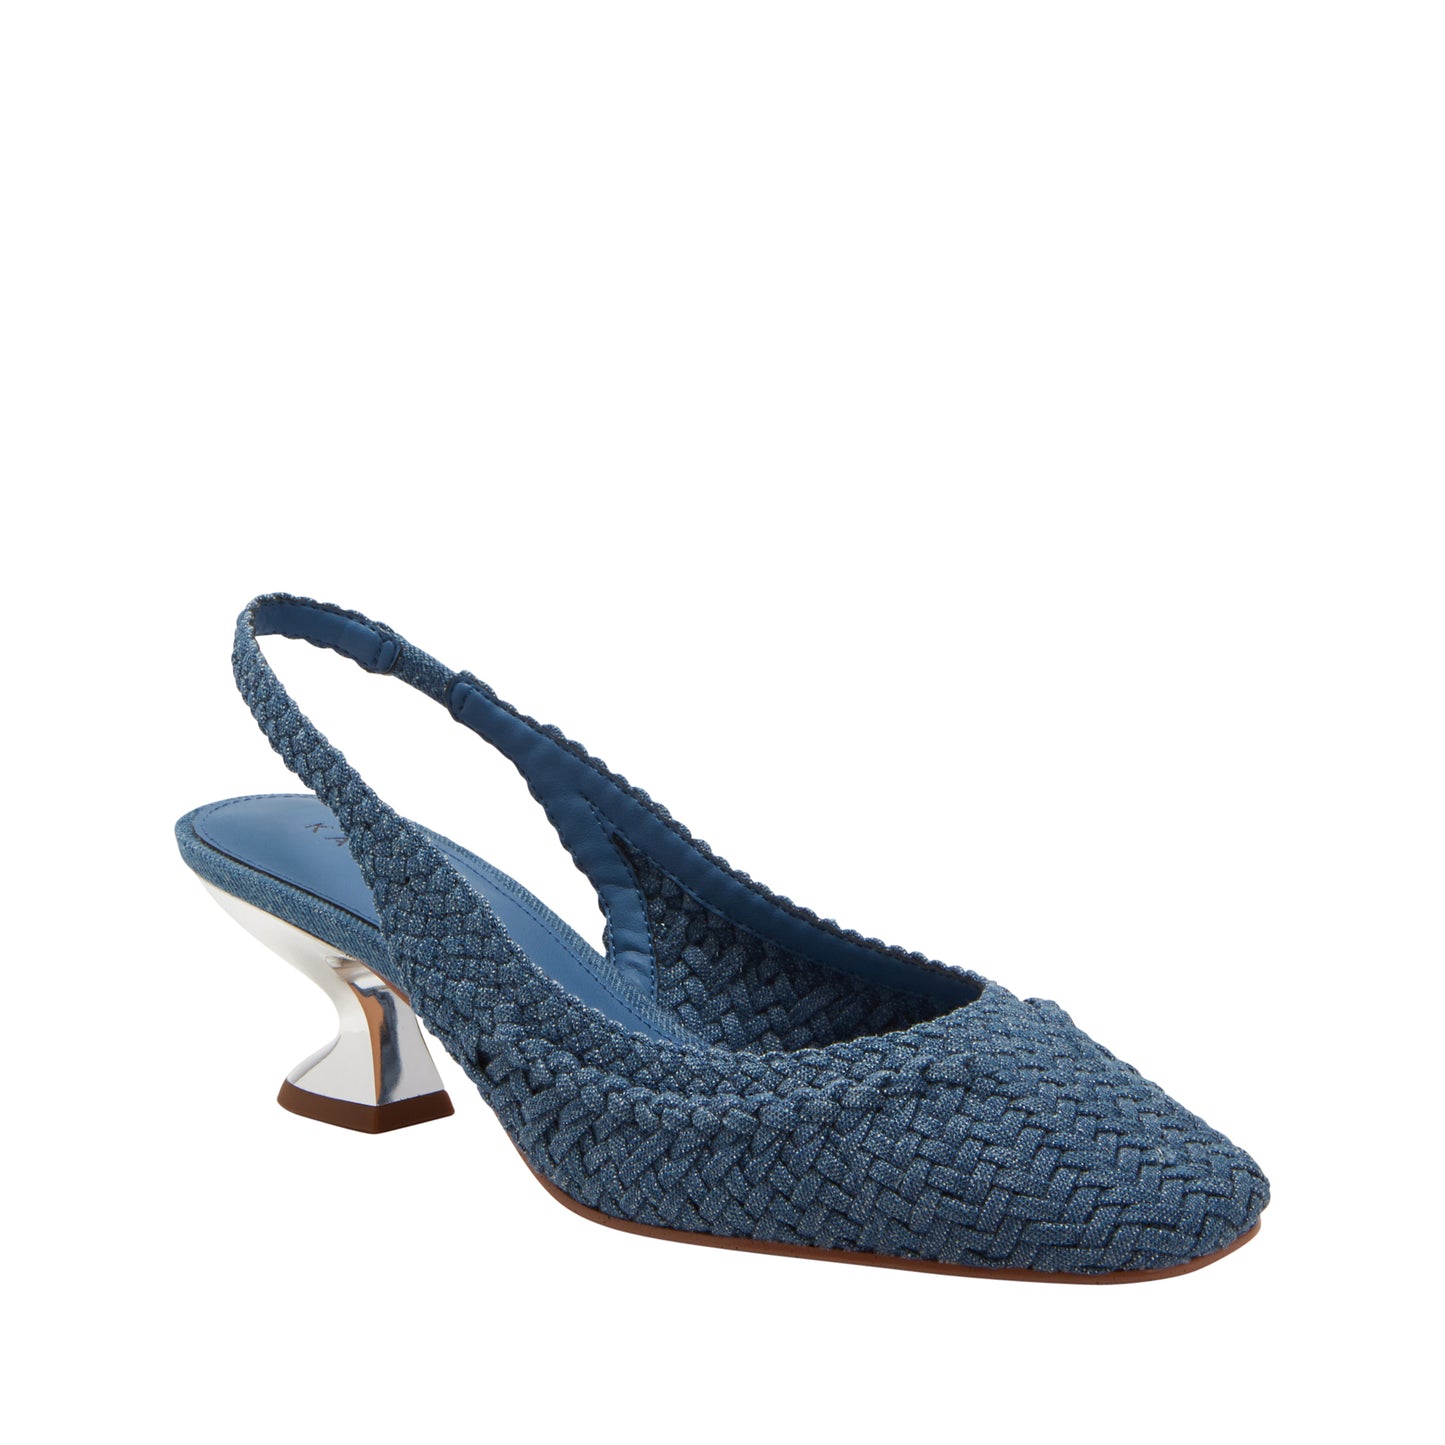 THE LATERR WOVEN SLING-BACK